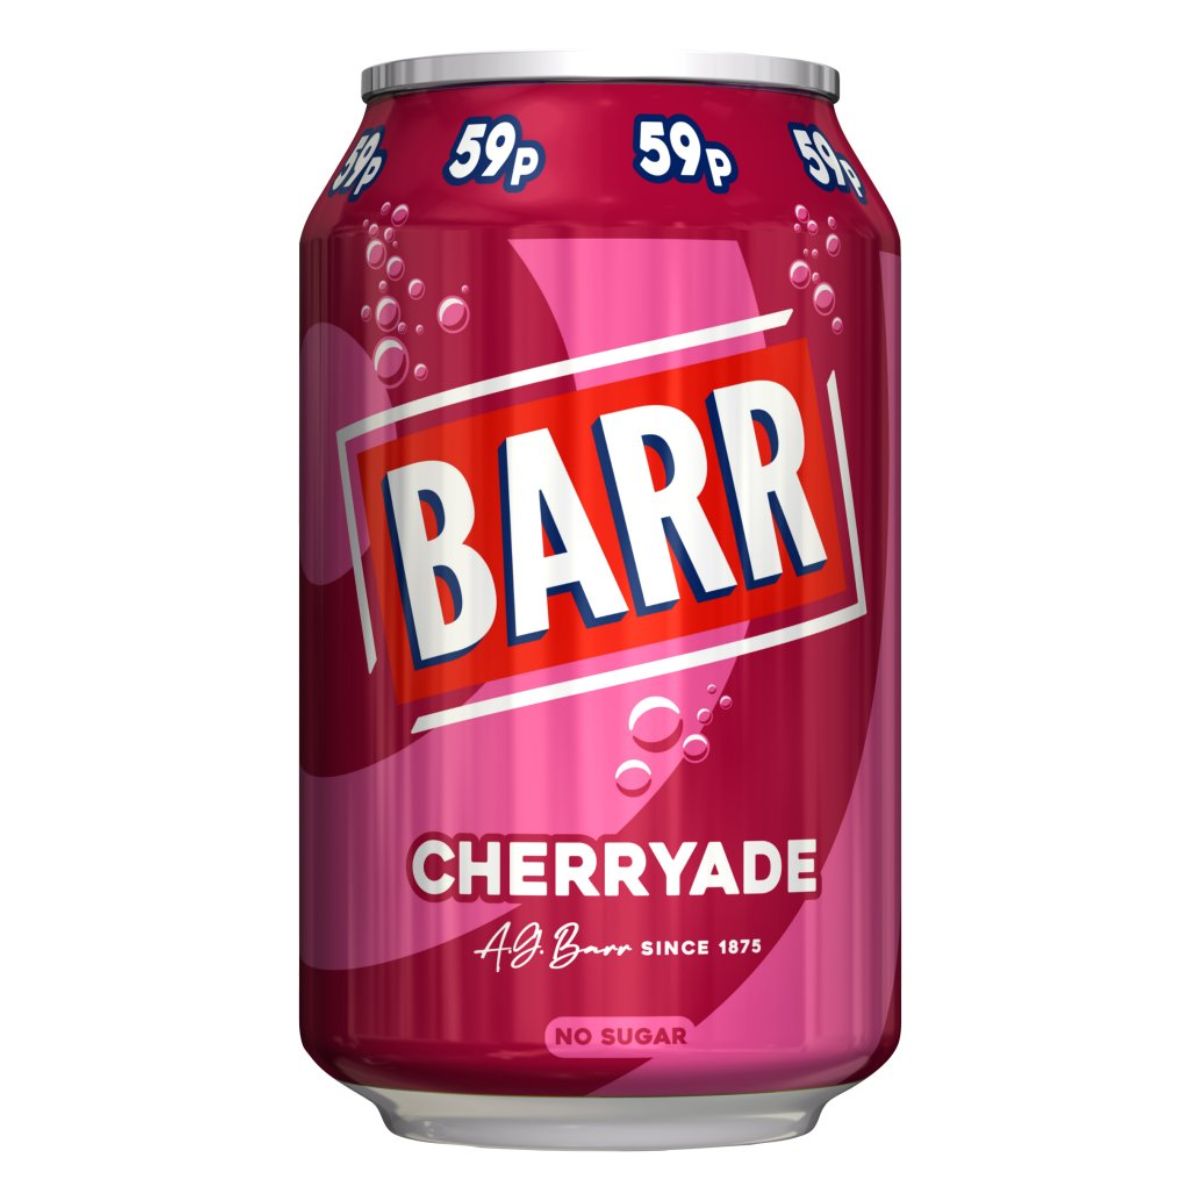 A can of Barr - Cherryade - 330ml on a white background.